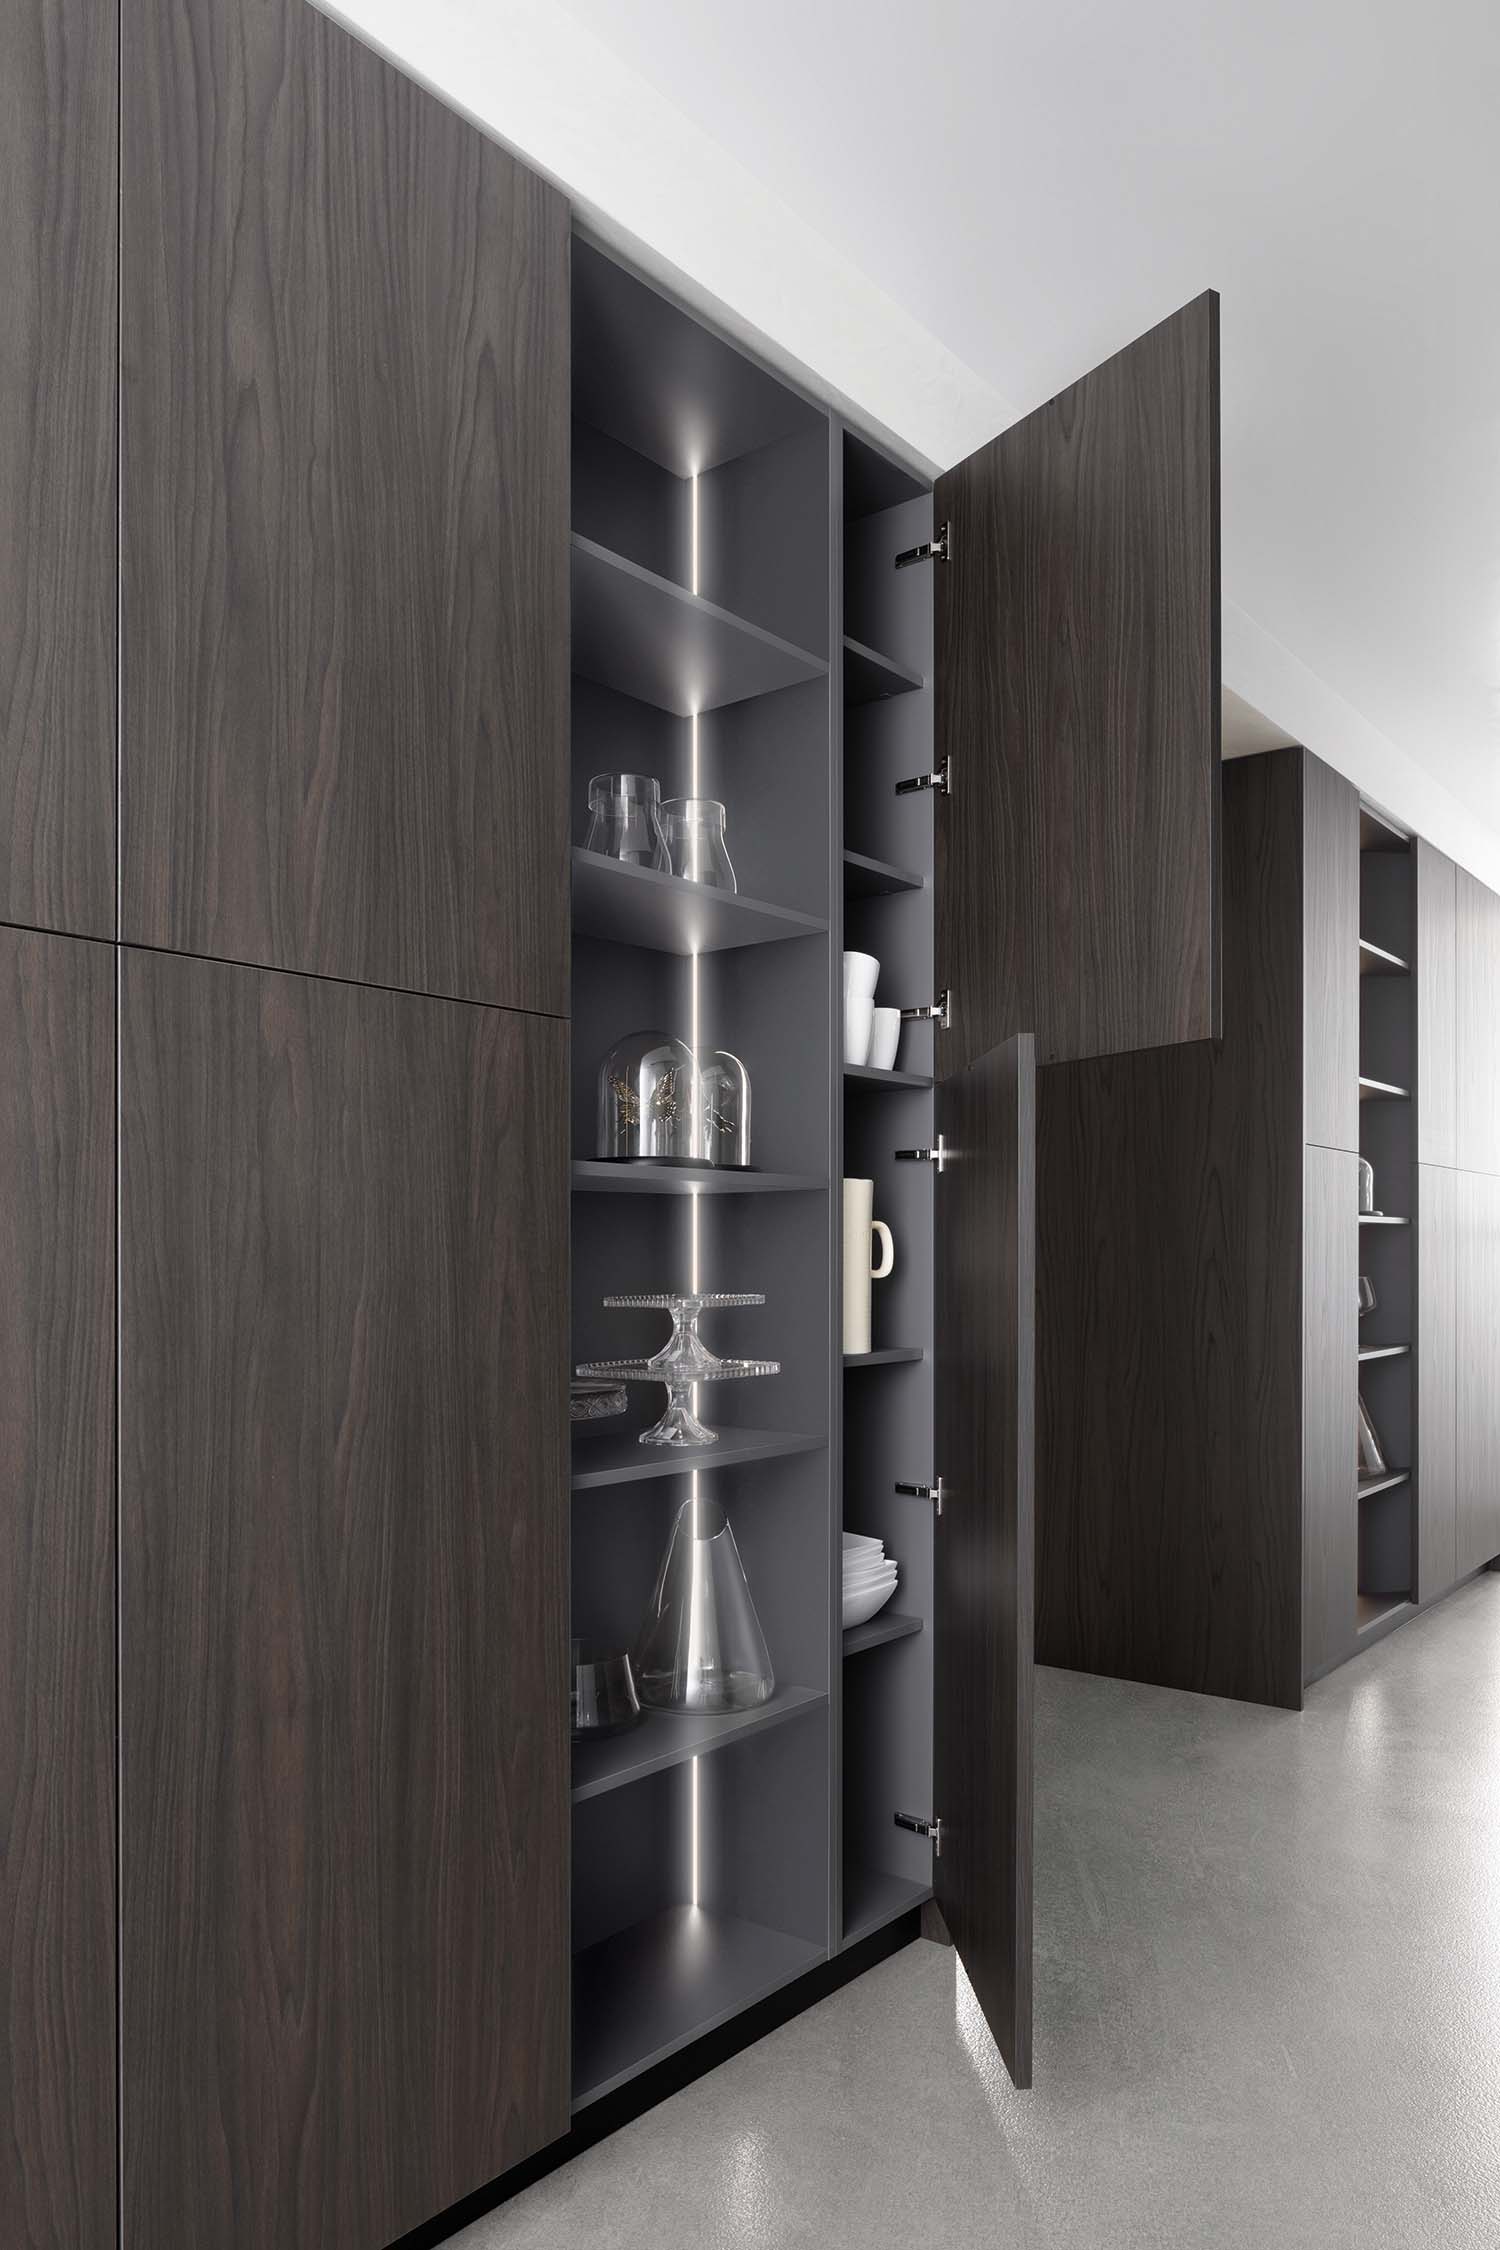 The tall units used from the living and dining room side are characterised by a projecting door that partially covers the adjacent open shelving.